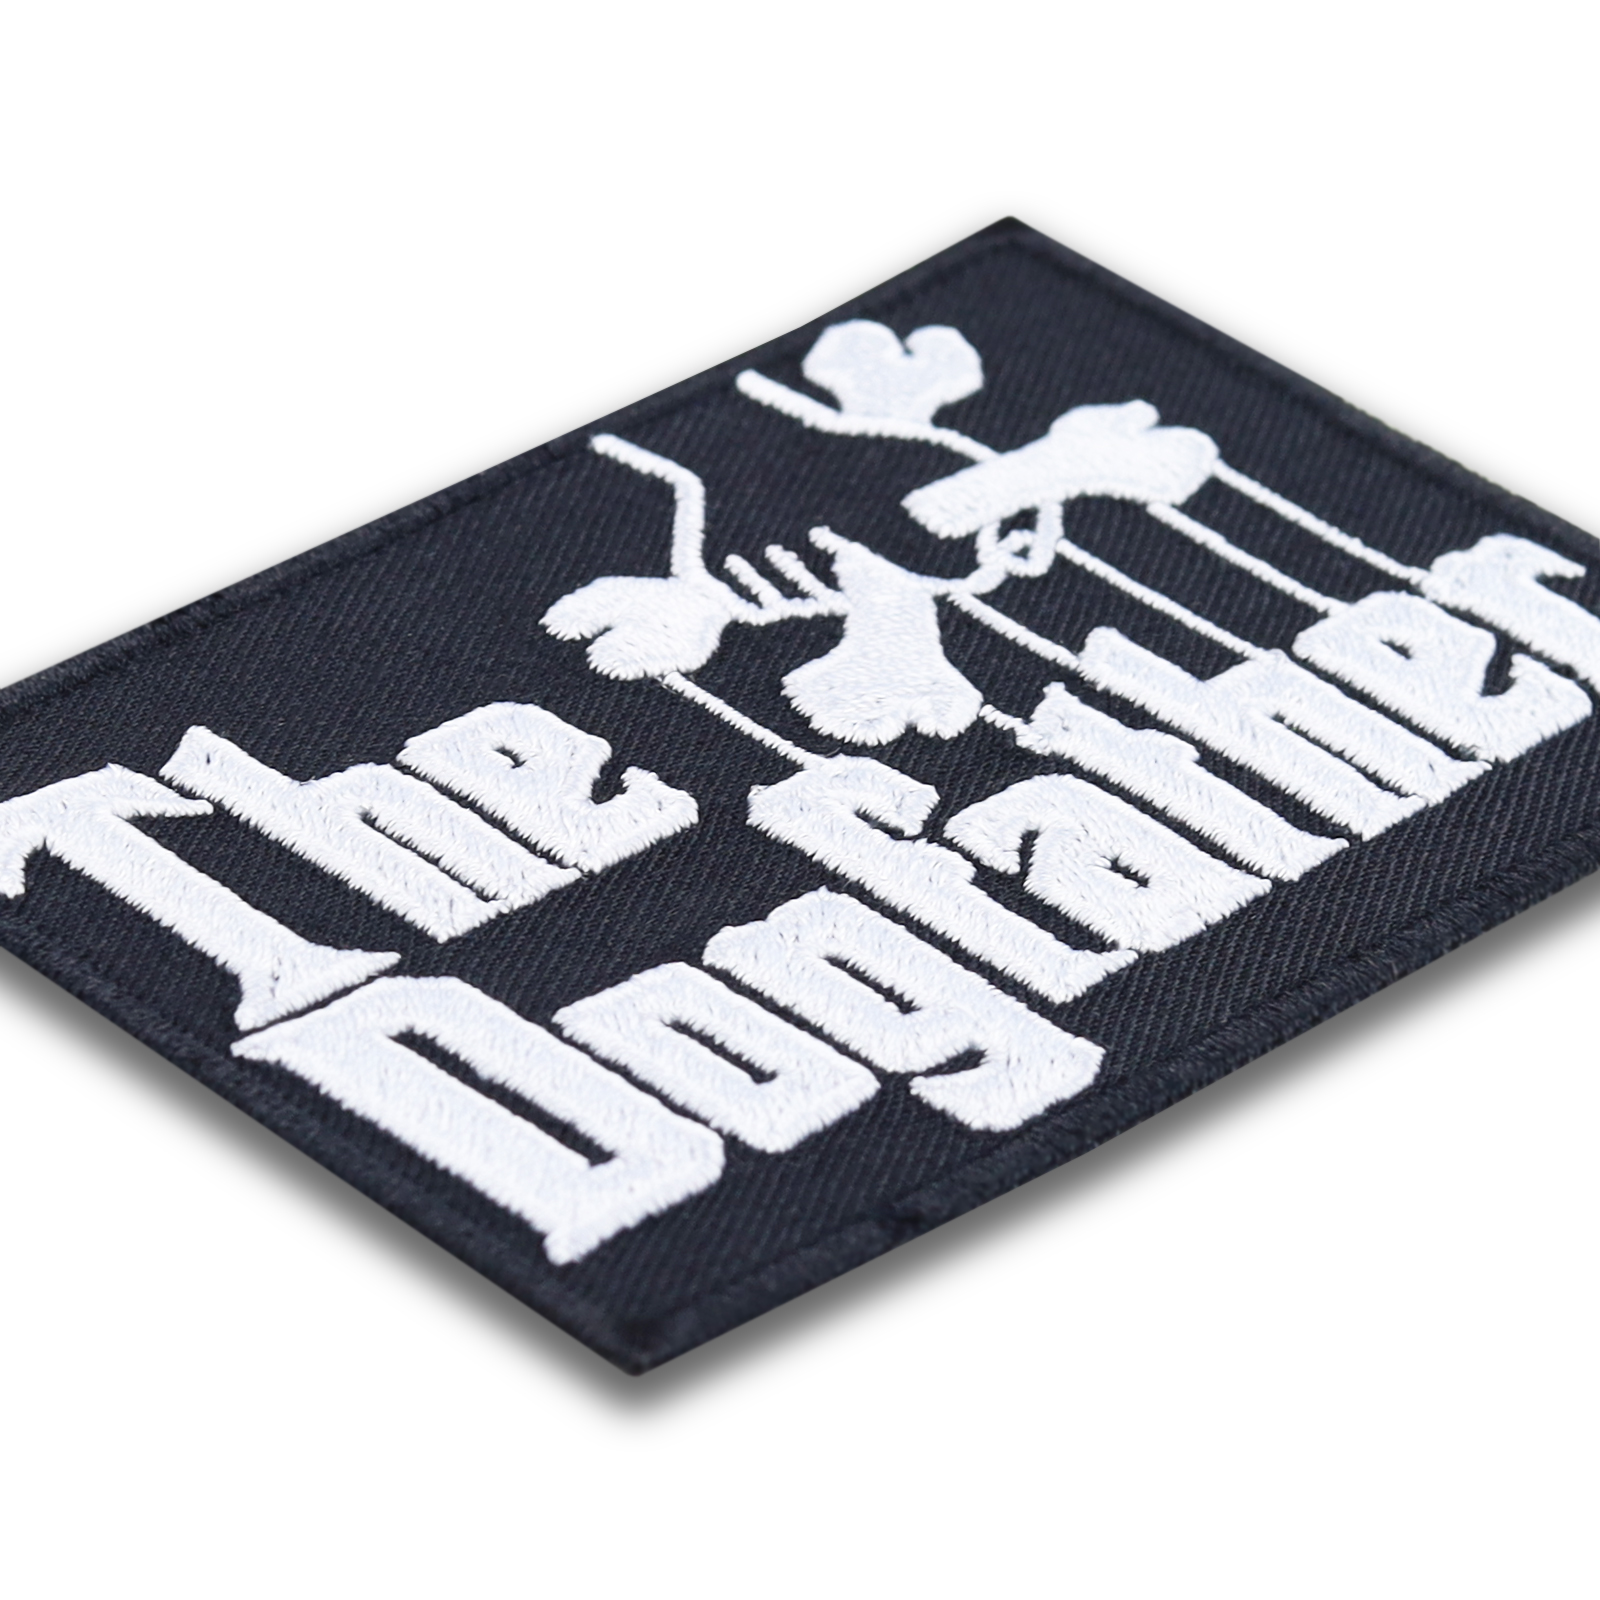 The dogfather - Patch